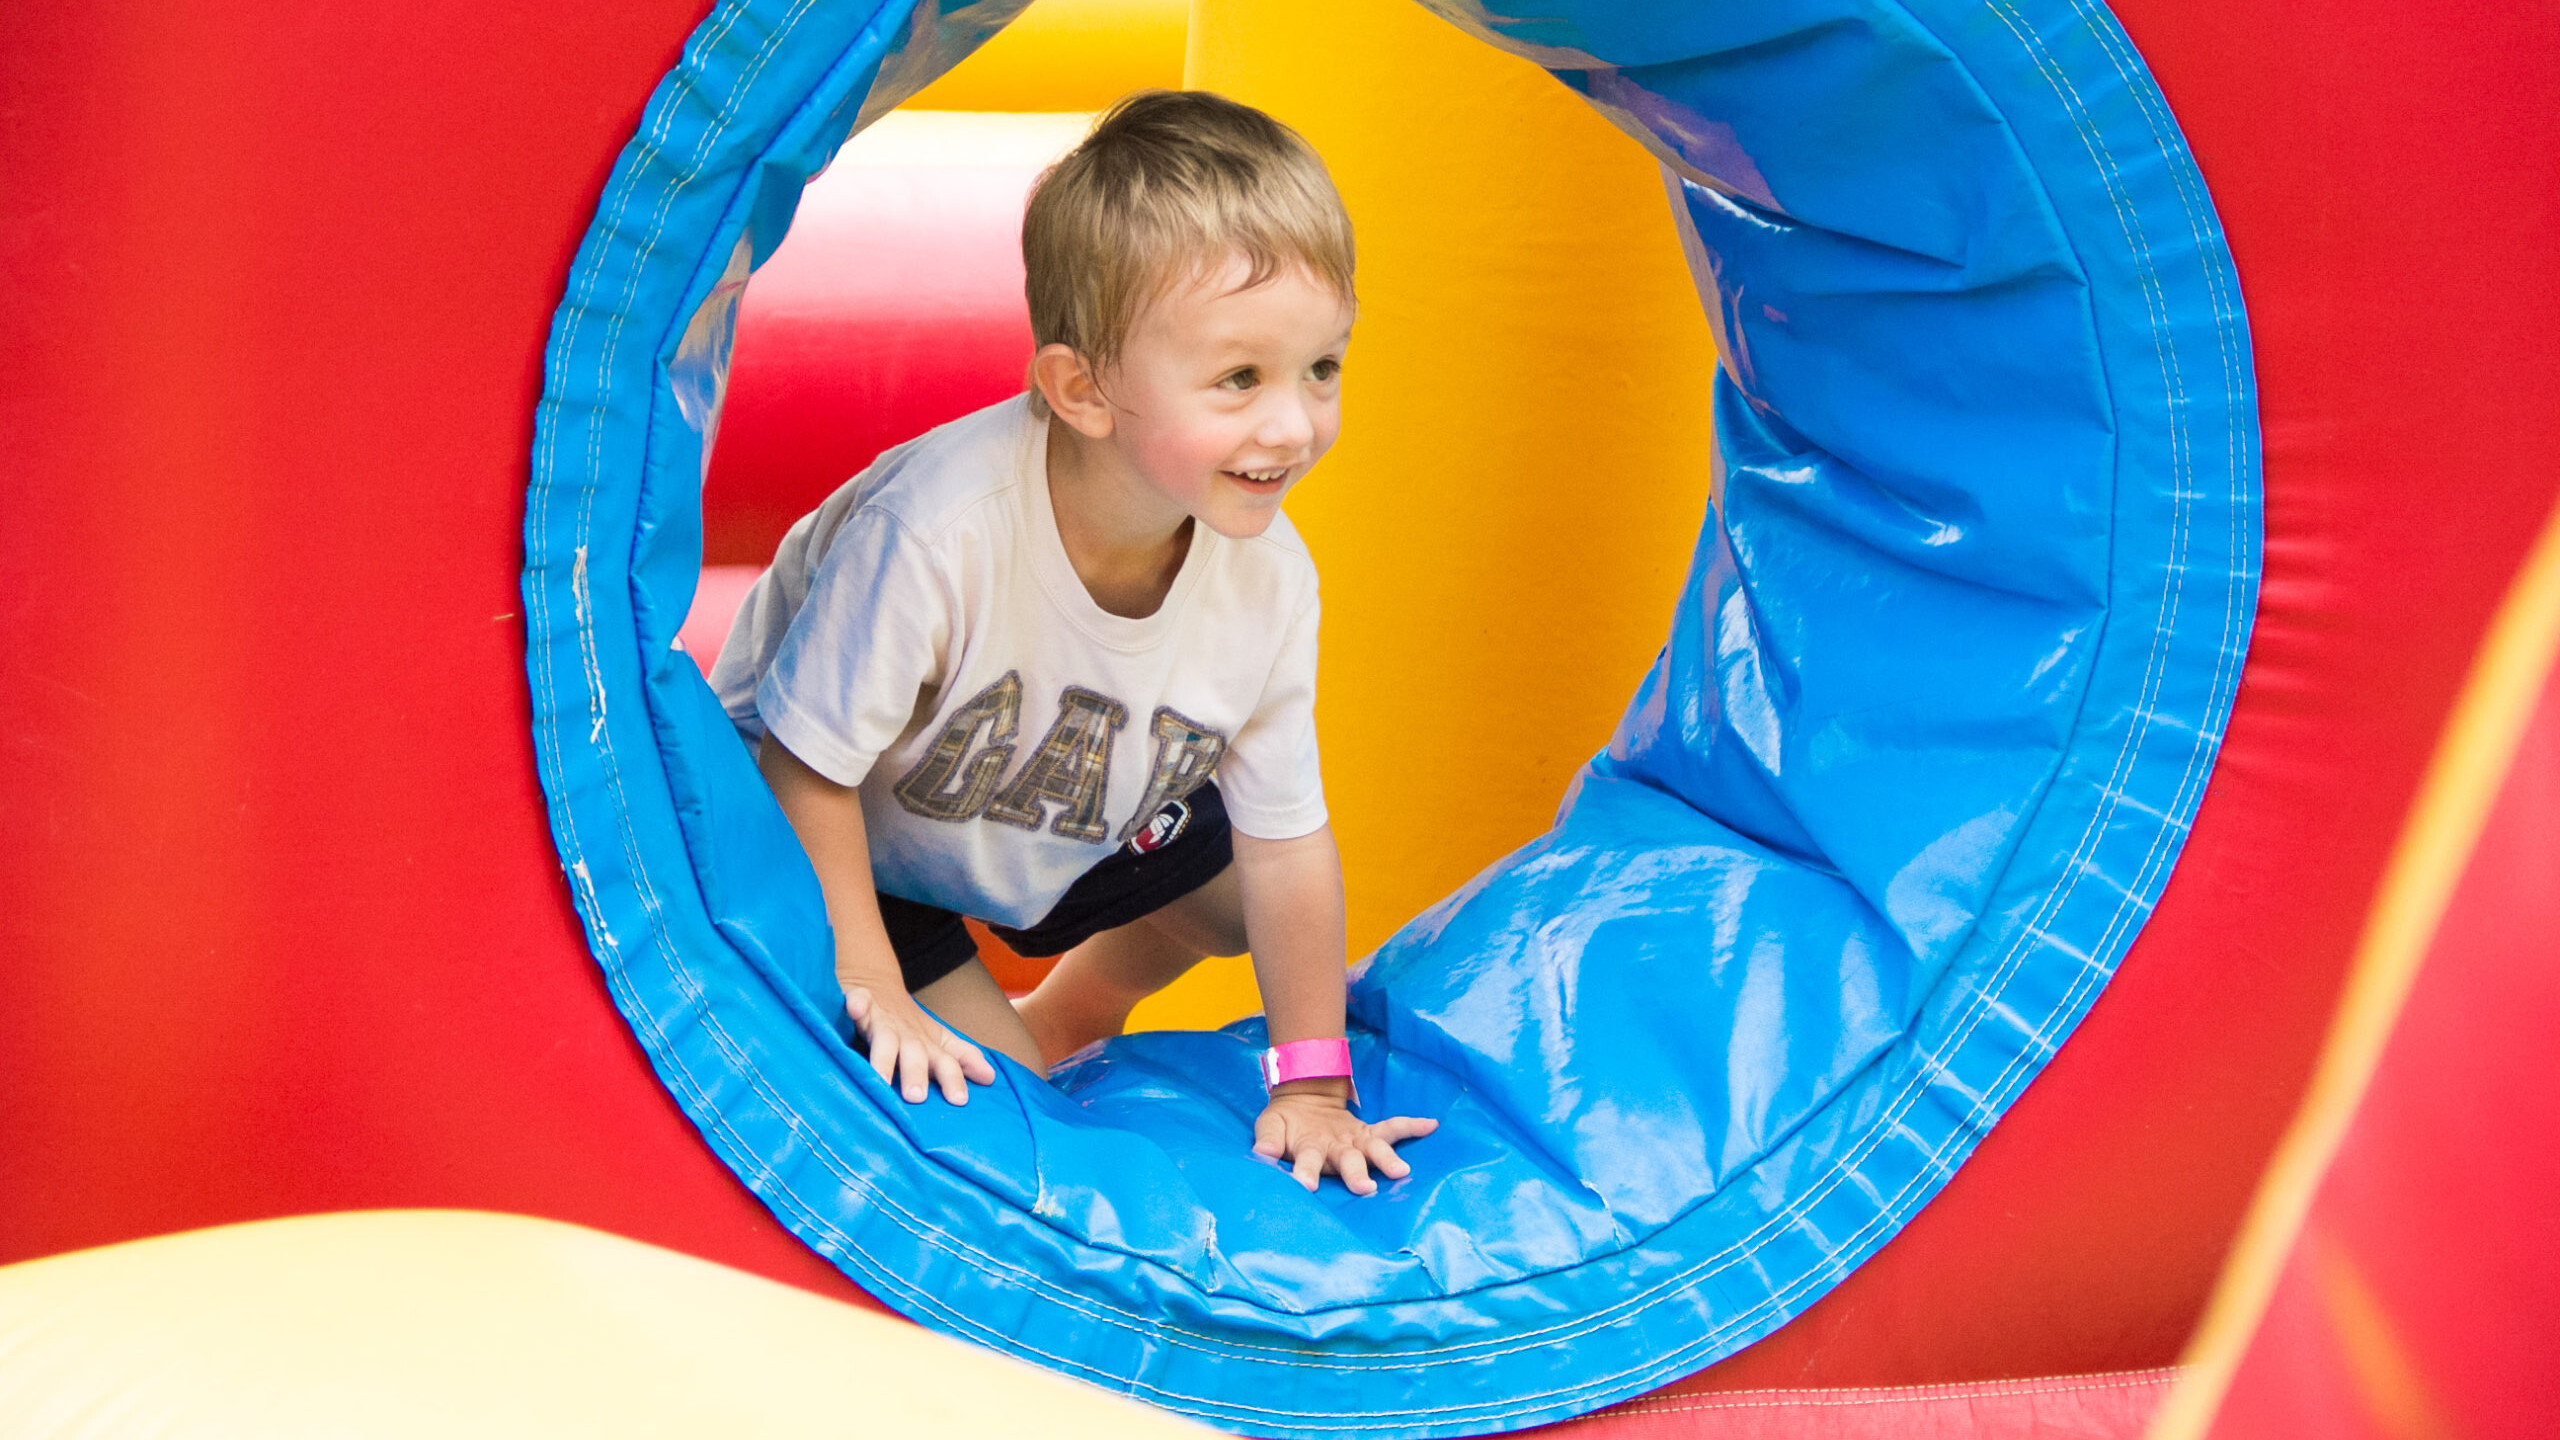 Boy climbing through inflatable obstacle course smiling and having fun.